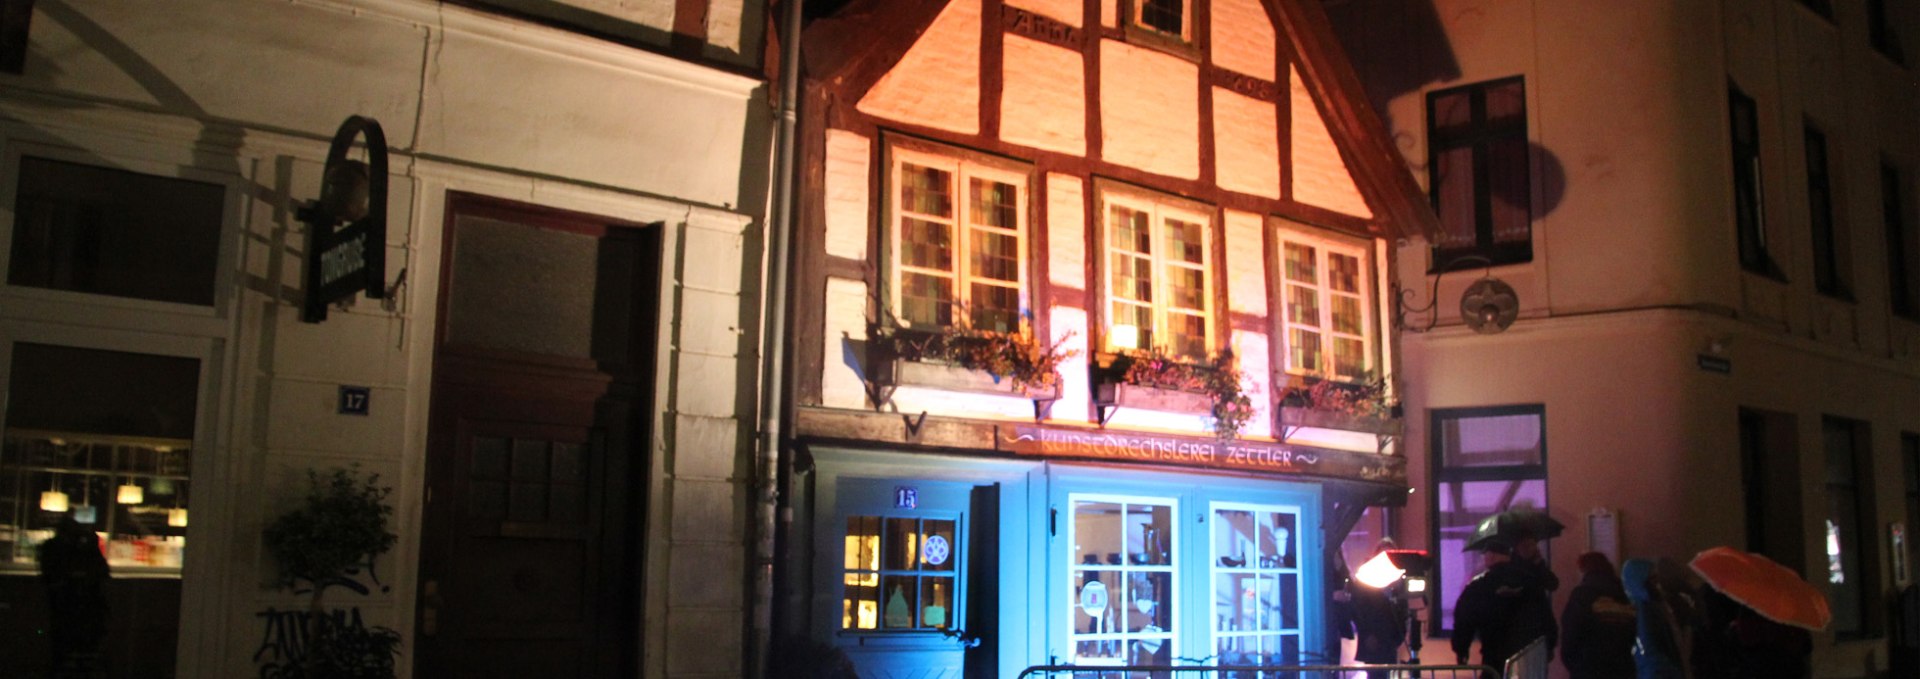 Illuminated façade in the old town, © Catharina Groth